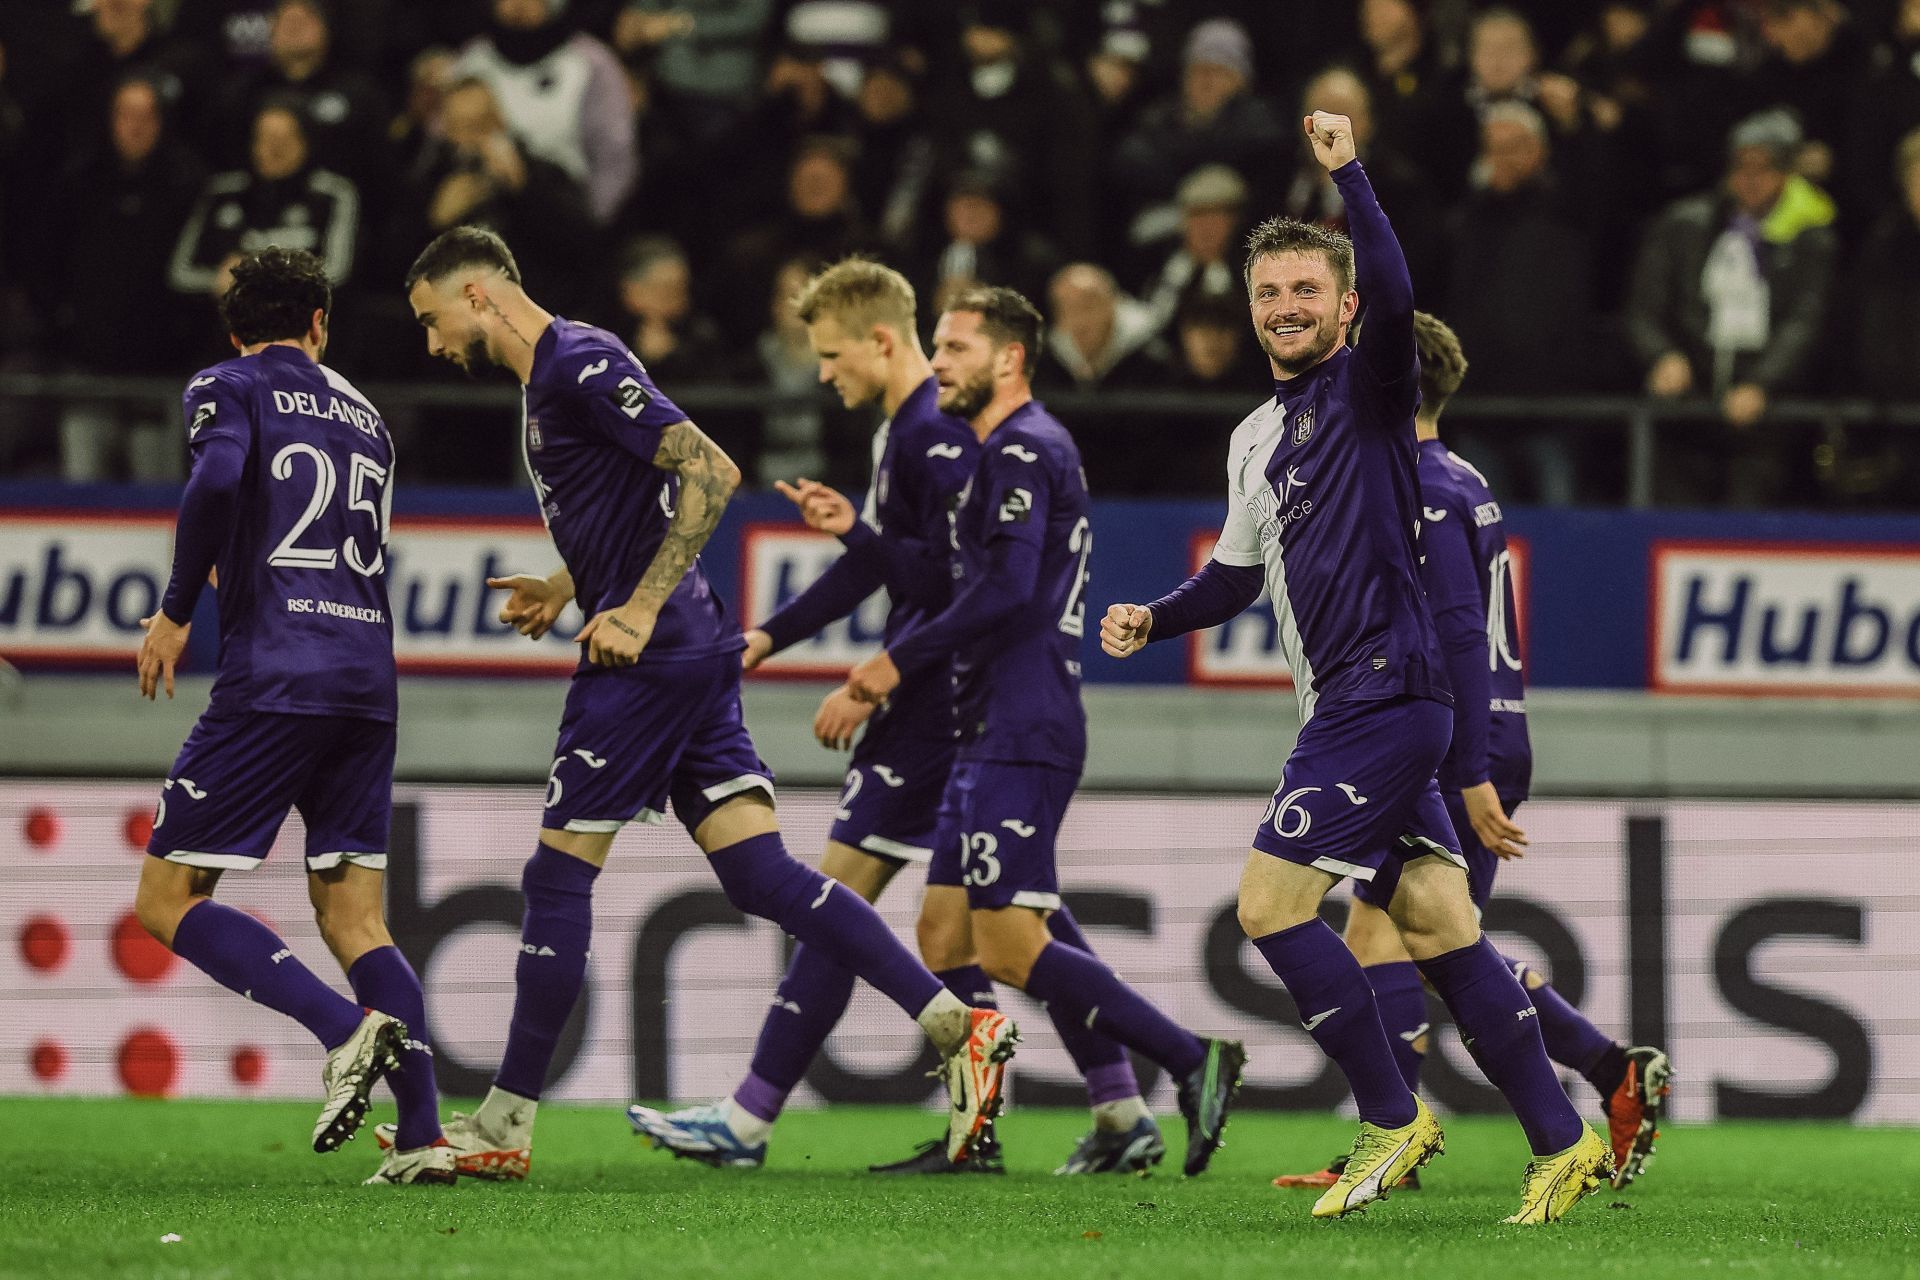 Anderlecht will face Club Brugge on Sunday 